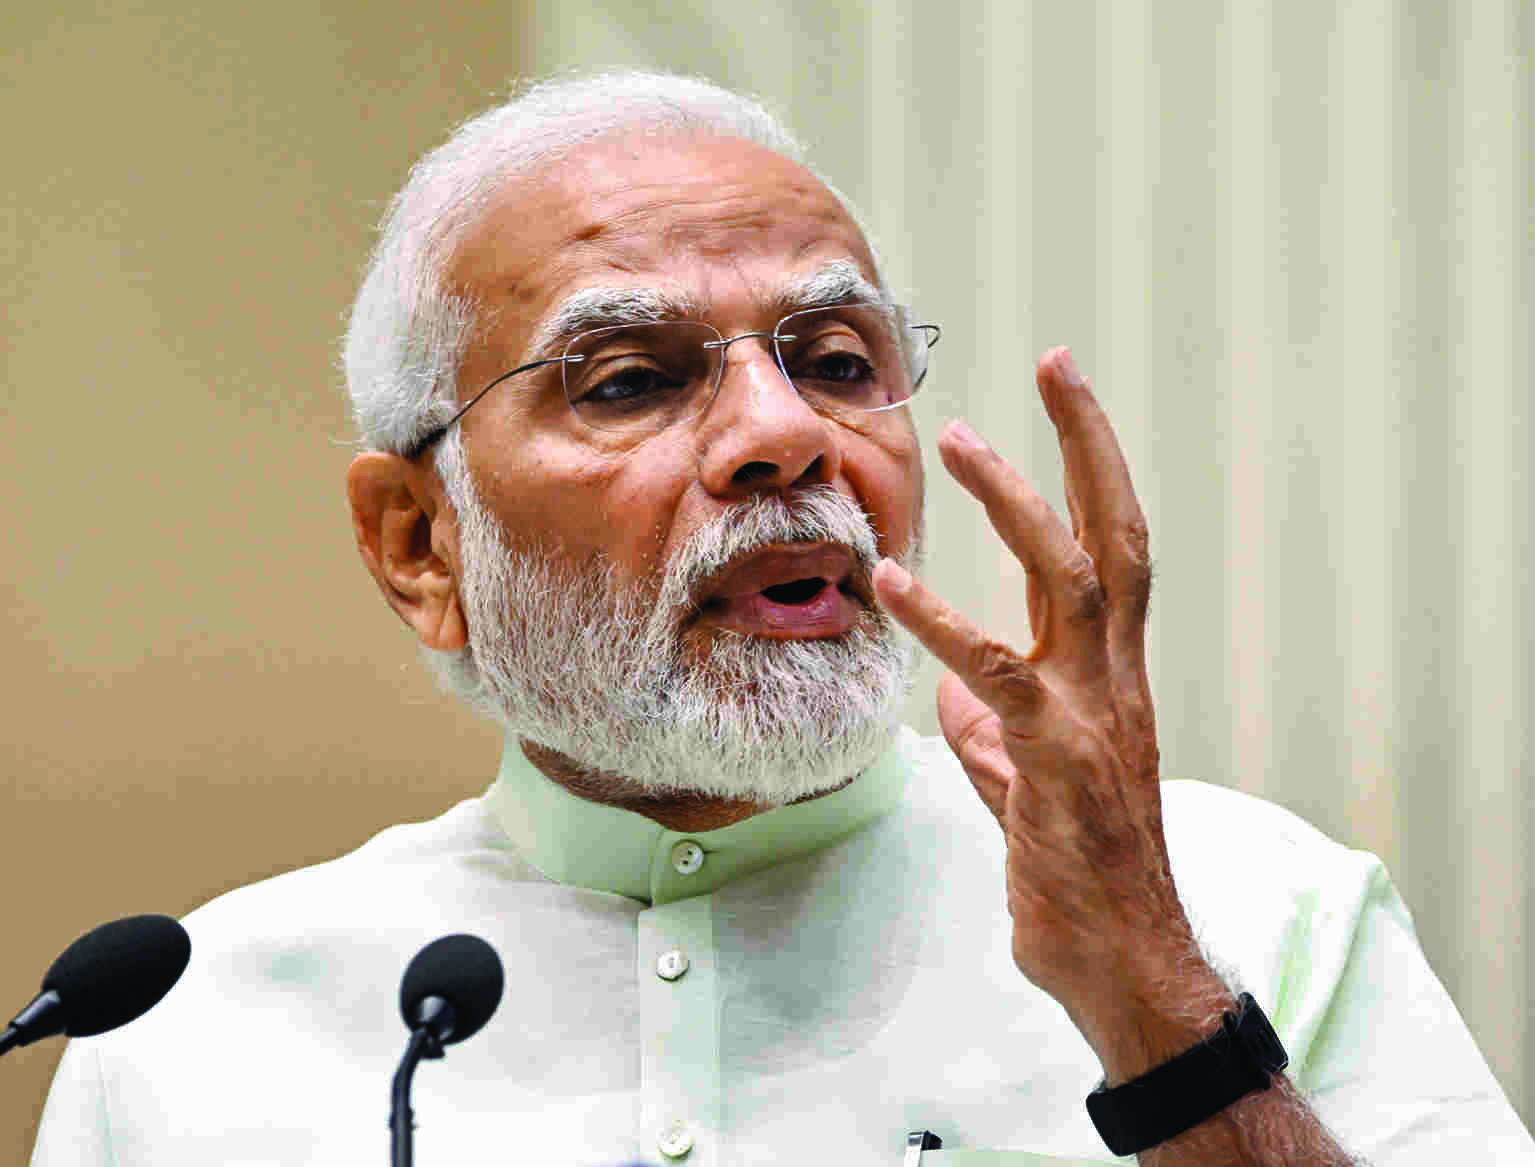 Coming yrs will belong to those who have invested in healthcare: Modi